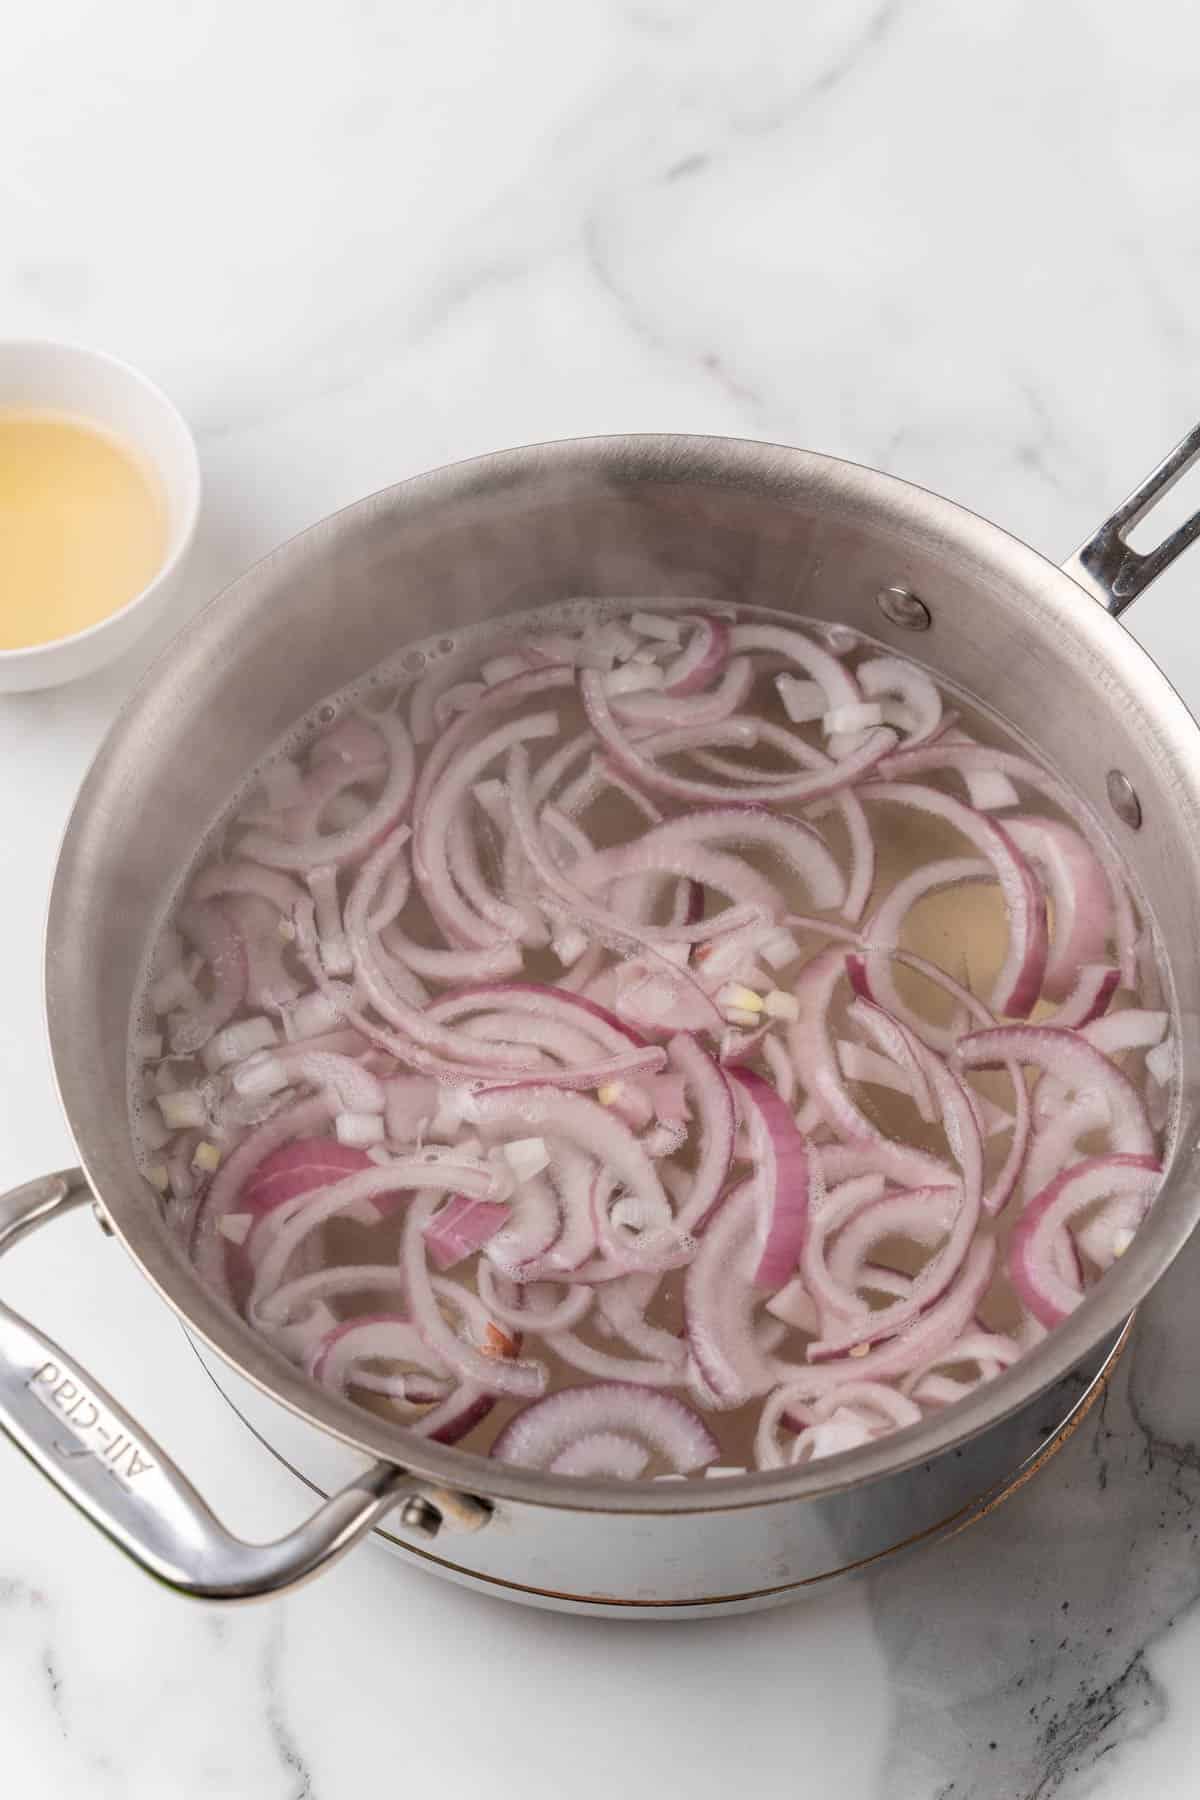 Sliced onions boiled in a metal pot full of water